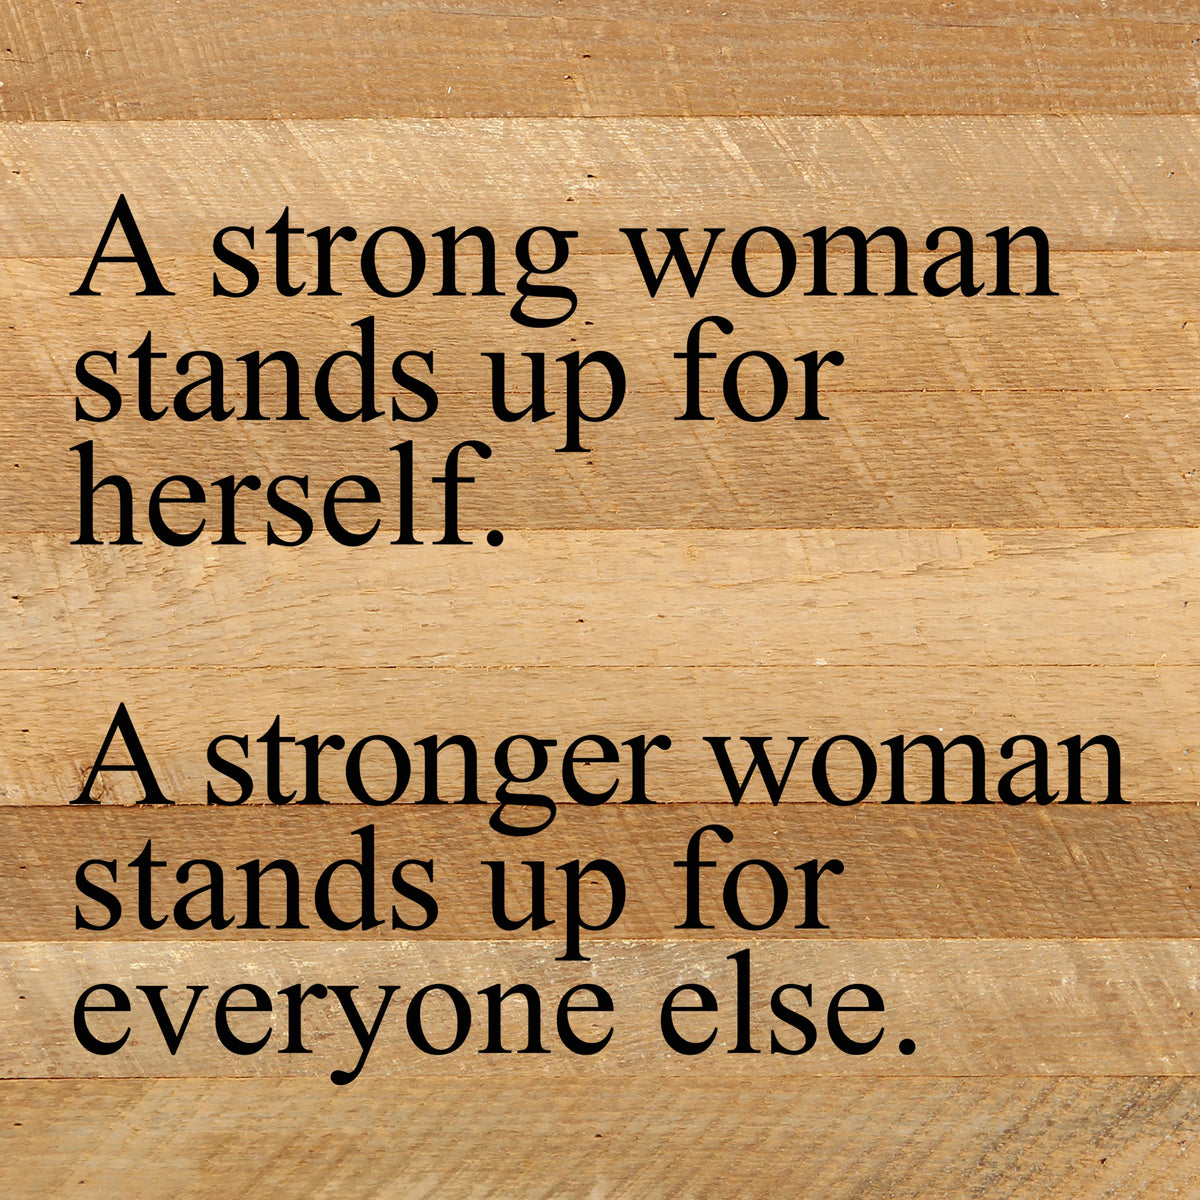 A strong woman stands up for herself. A stronger woman stands up for everyone else. / 10"x10" Reclaimed Wood Sign